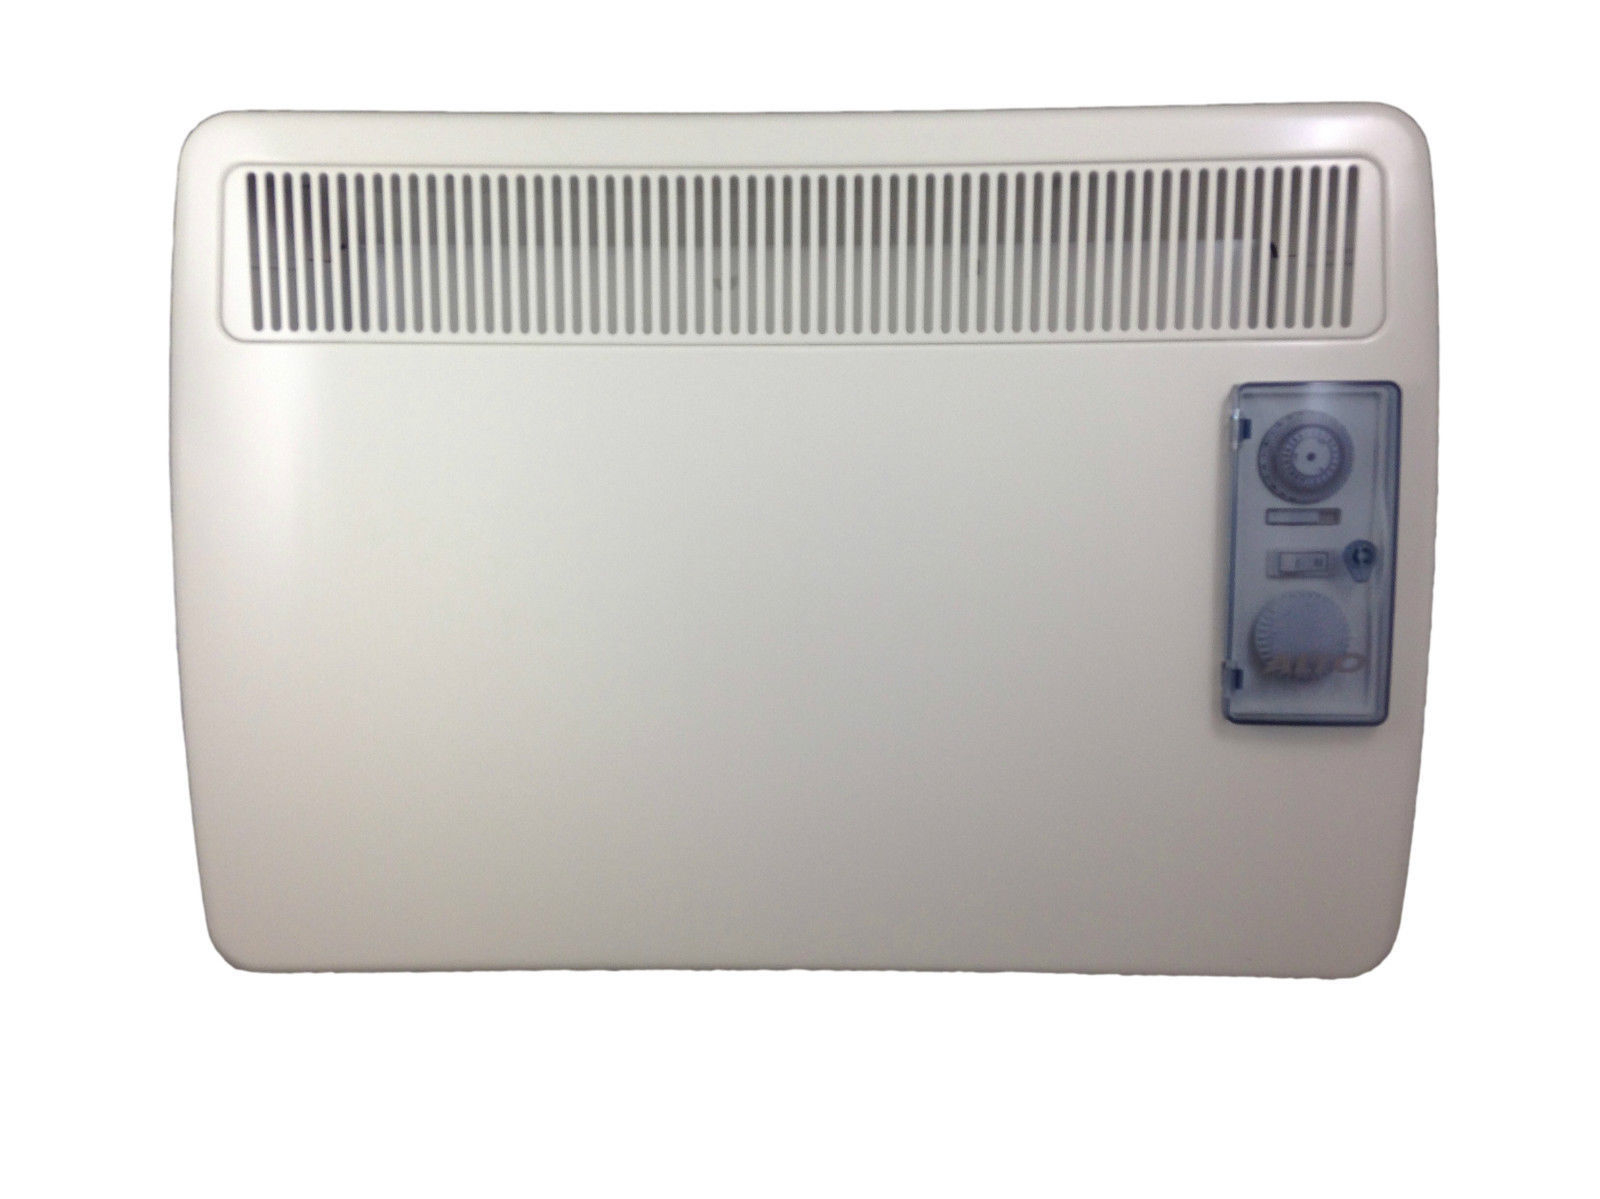 Wall Mounted Panel Convector Heater Made Same Co As Dimplex Creda throughout size 1600 X 1199